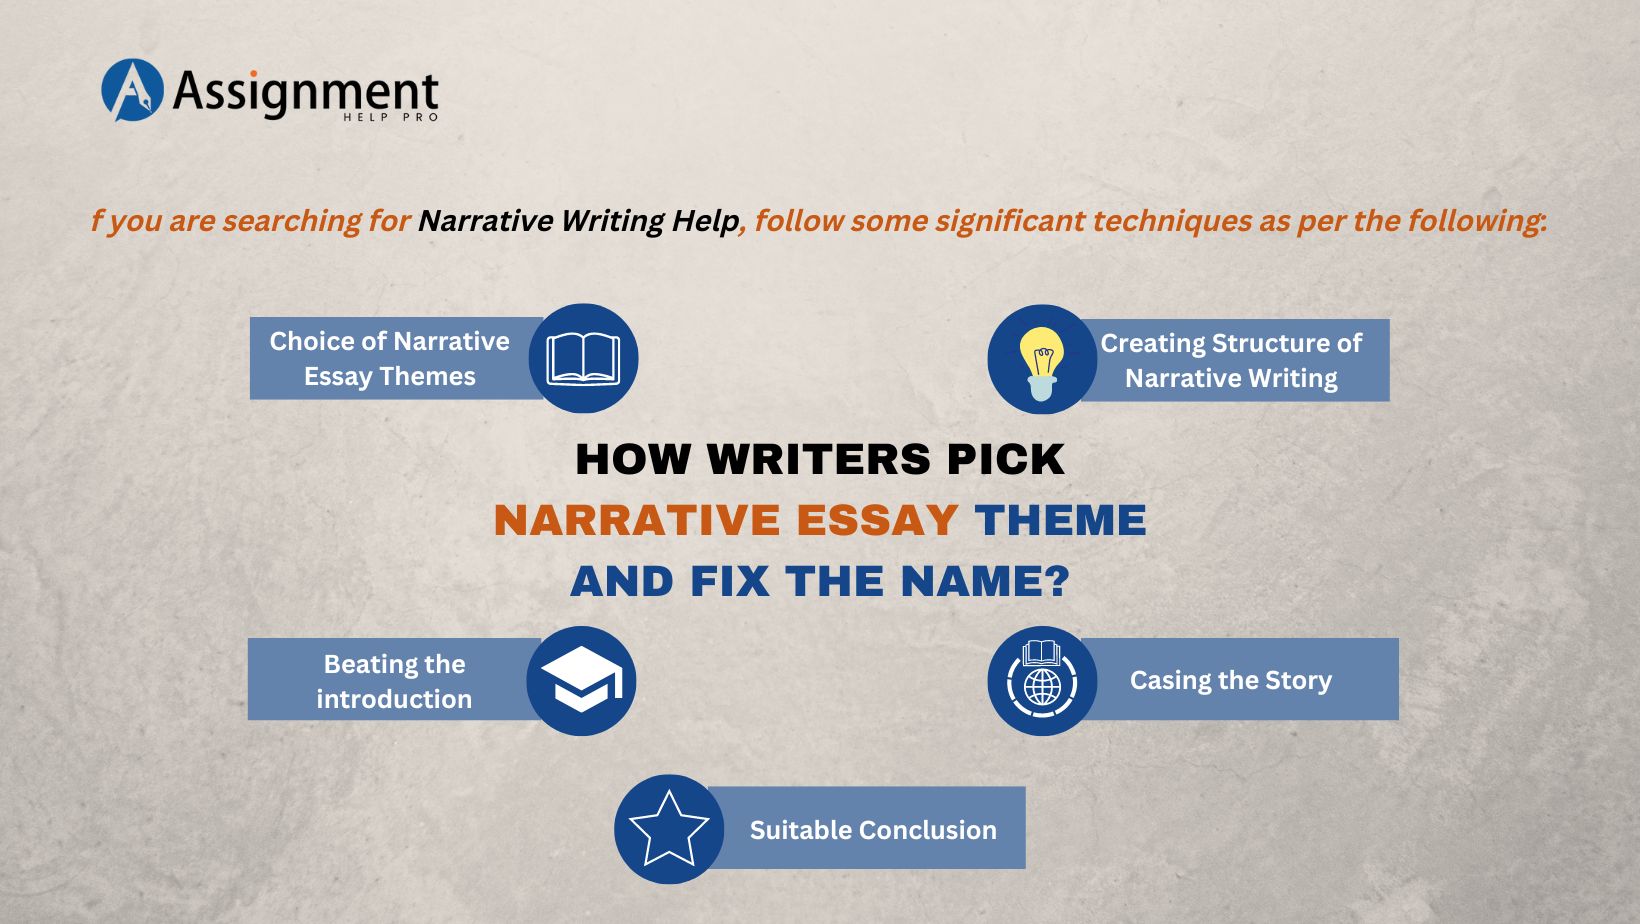 How Writers Pick Narrative Essay Theme and Fix the Name